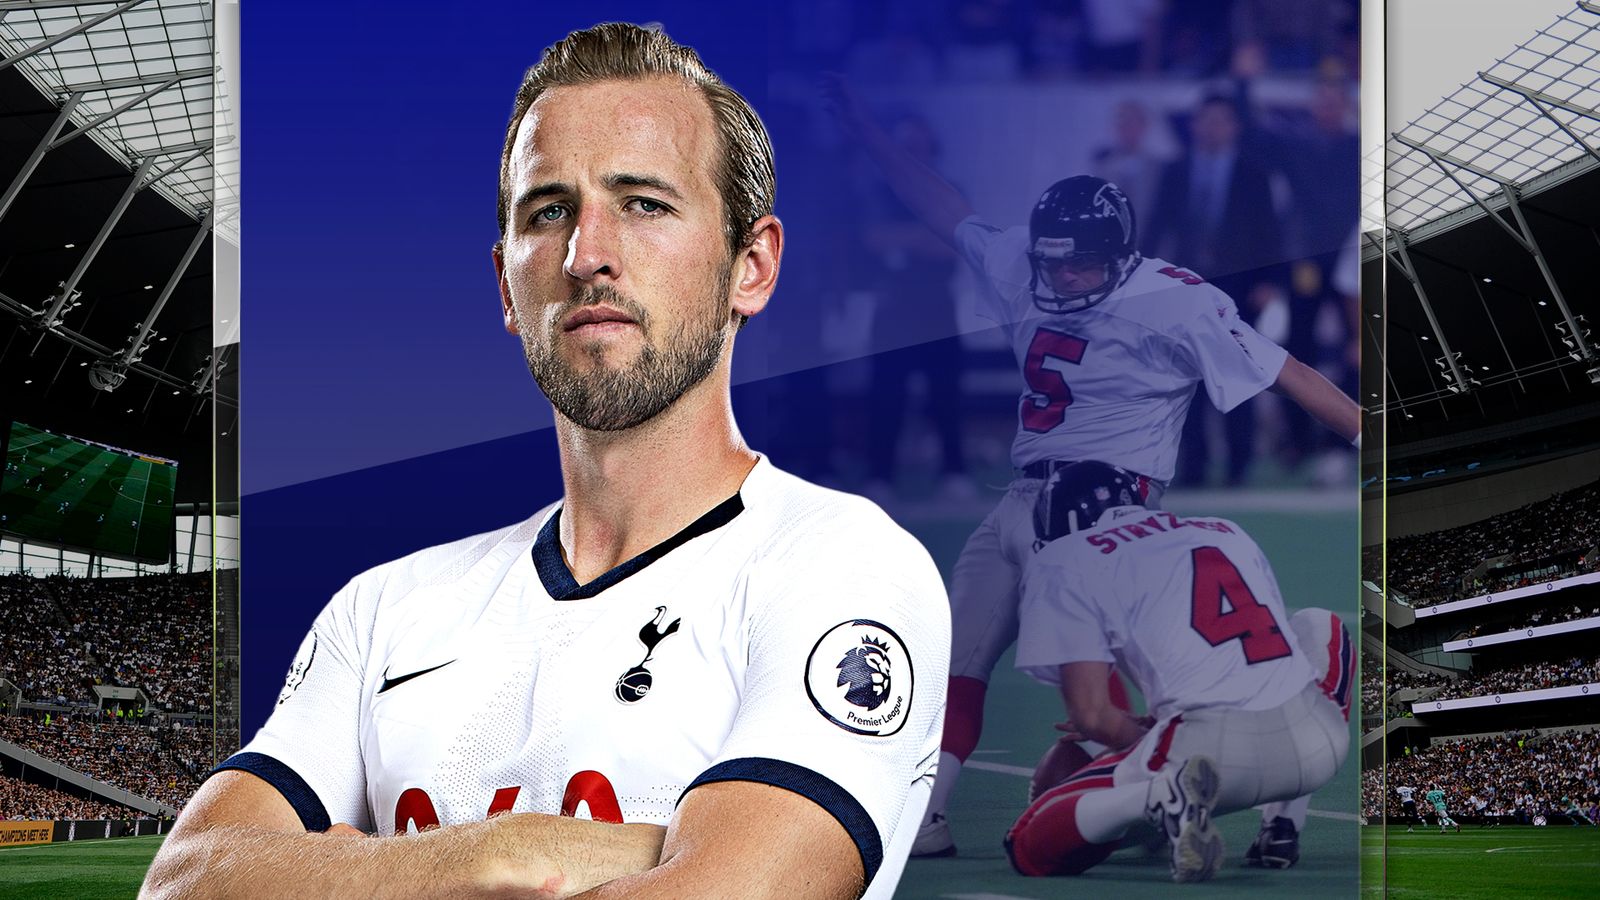 Harry Kane: I want to play in the NFL as a kicker